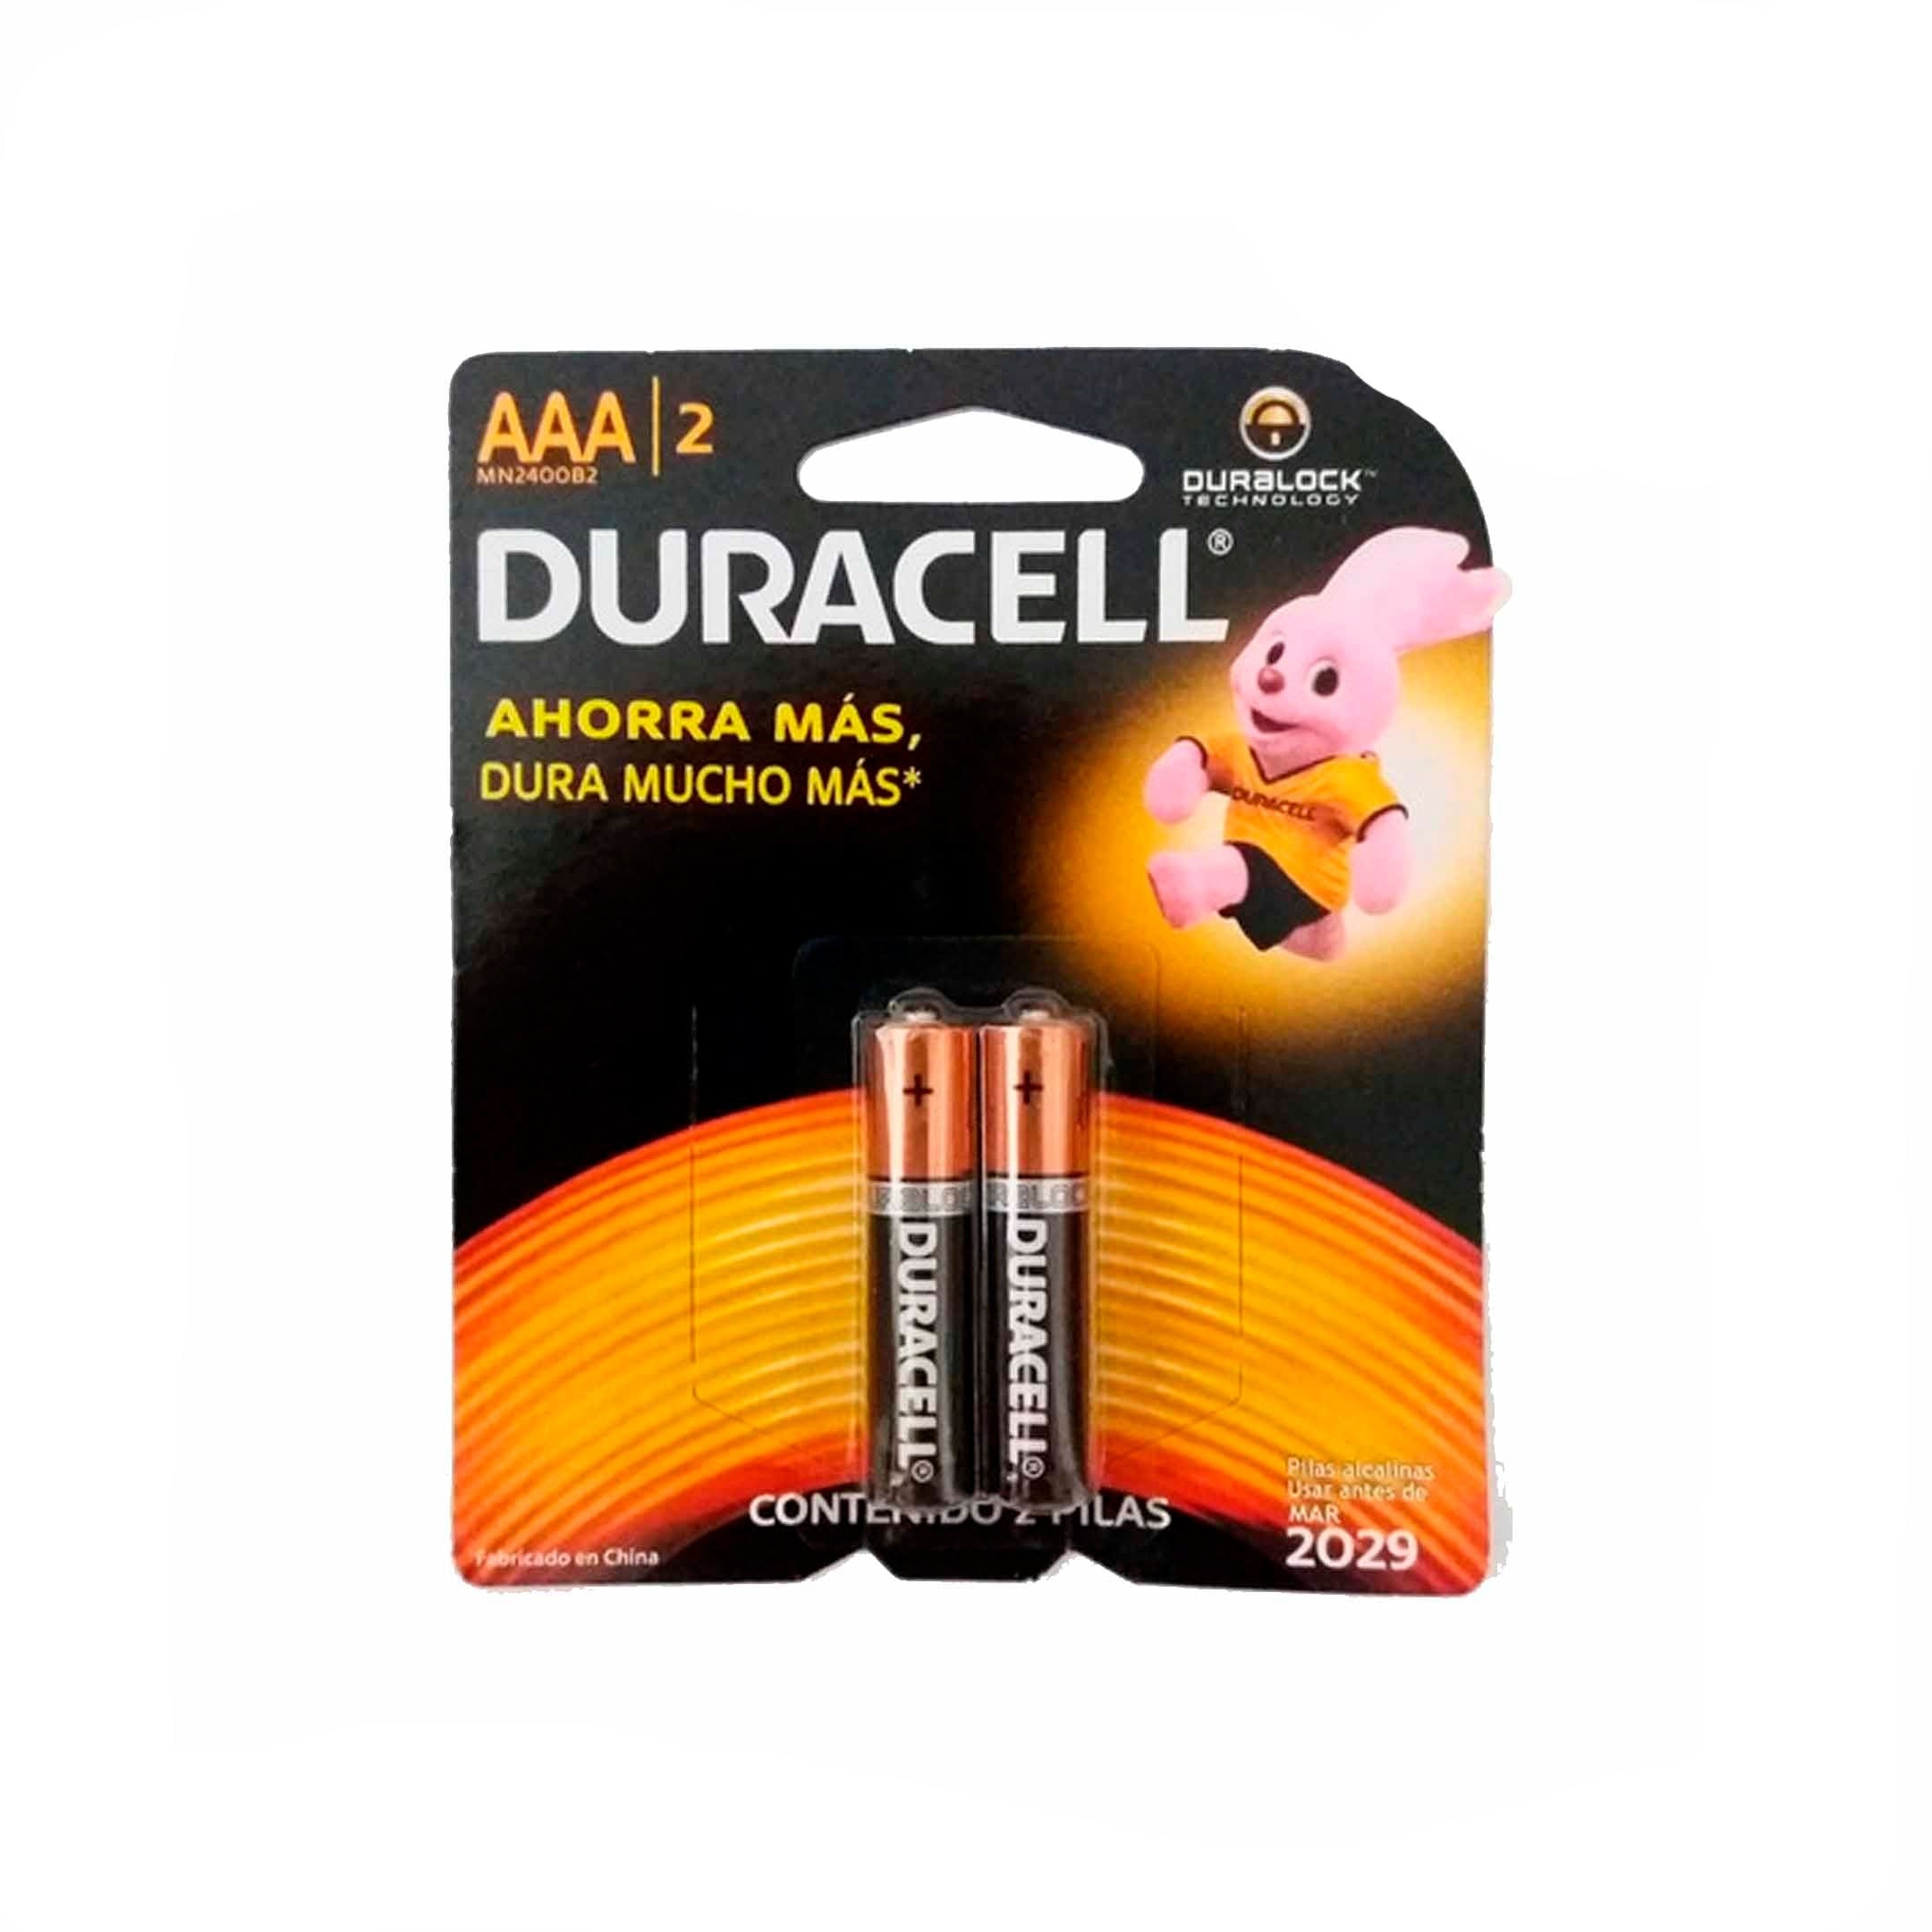 PILAS AAA DURACELL – Daghidelivery